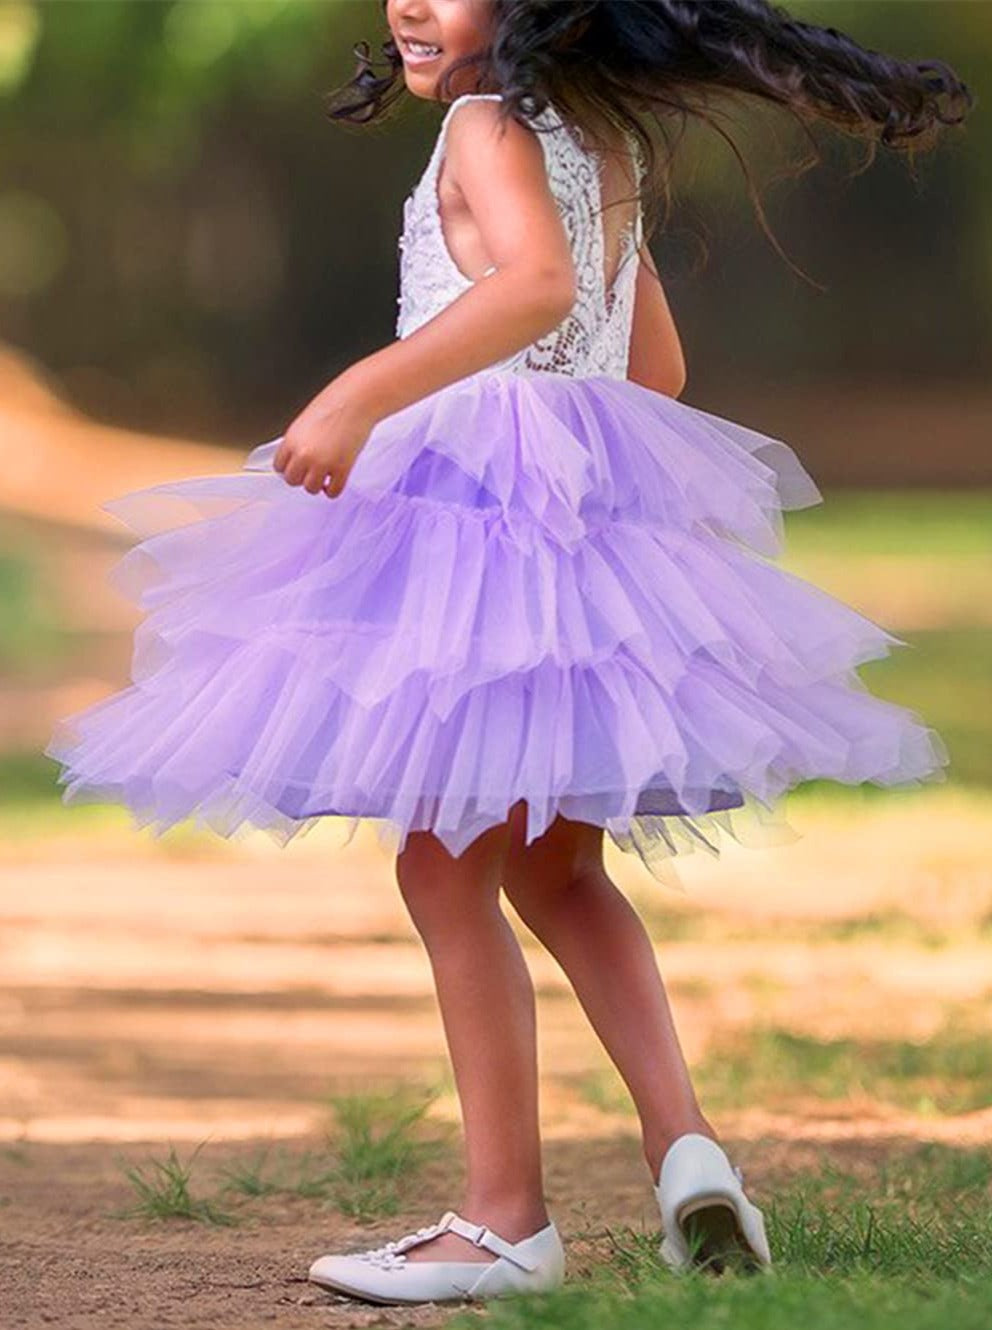 2Bunnies Flower Girl Dress Peony Lace Back A-Line Sleeveless Tiered Tulle Short (Purple) - 2BUNNIES